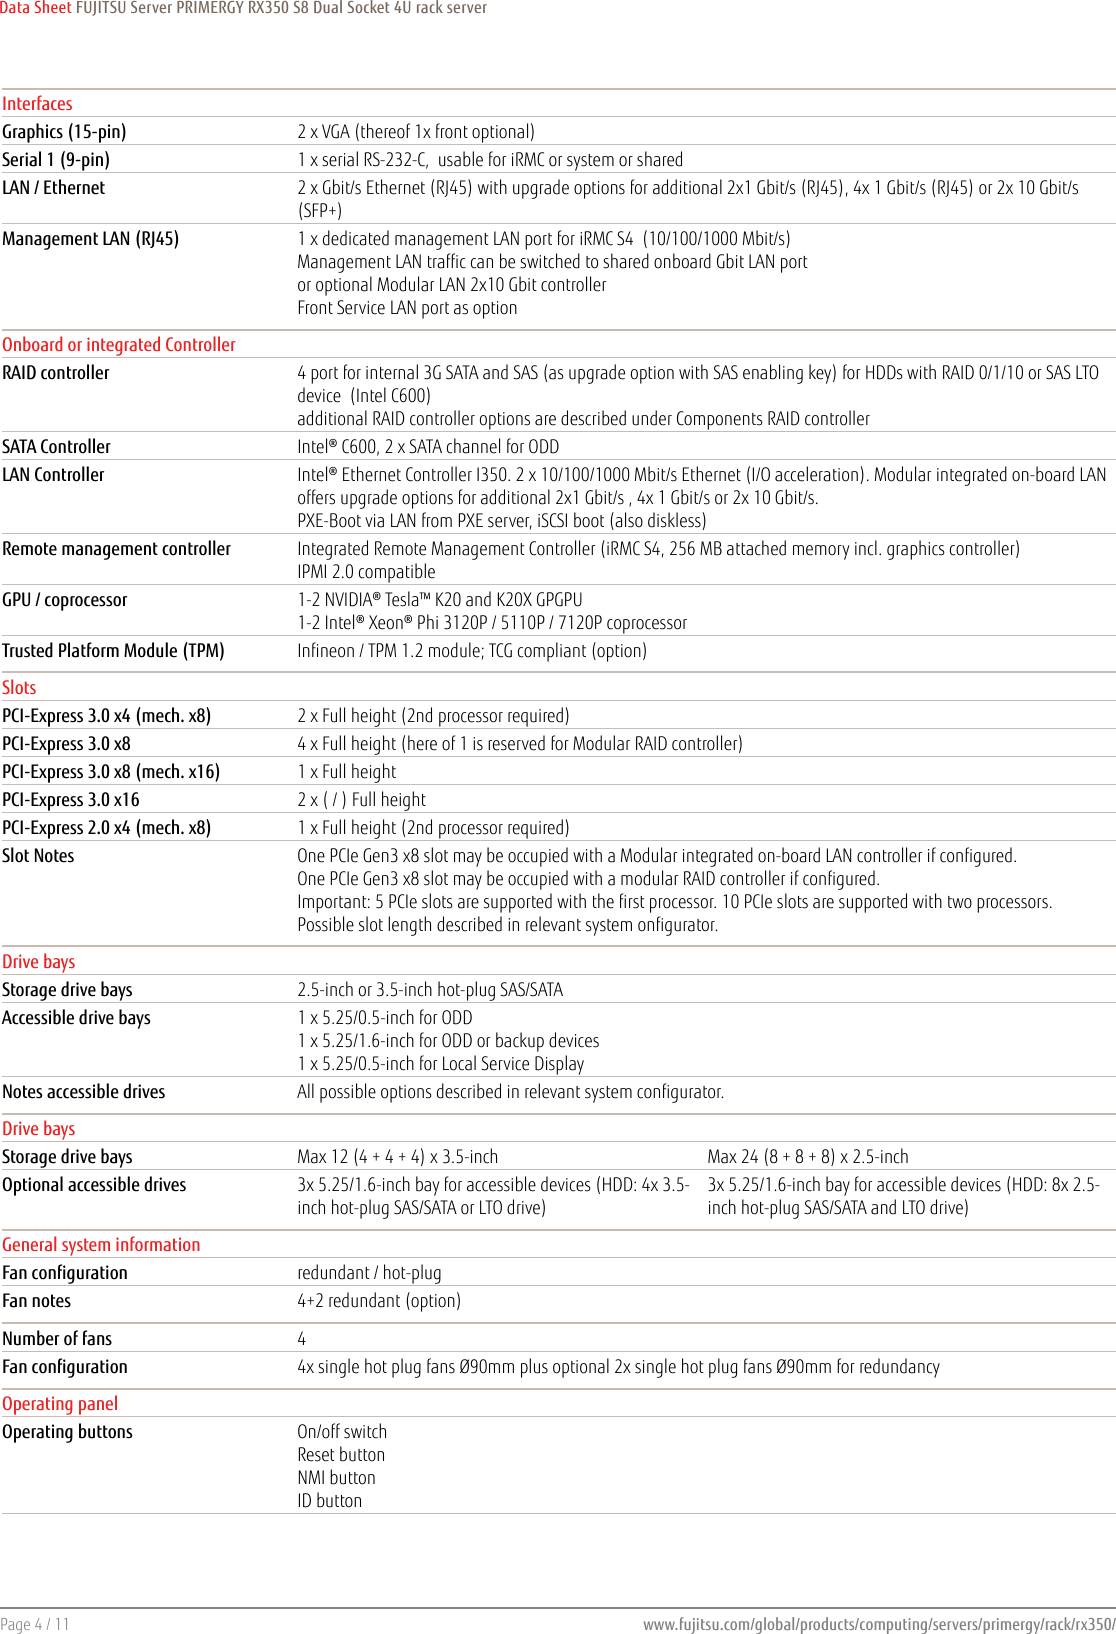 Page 4 of 11 - Fujitsu  PRIMERGY RX350 S8 Data Sheet Ds-py-rx350-s8